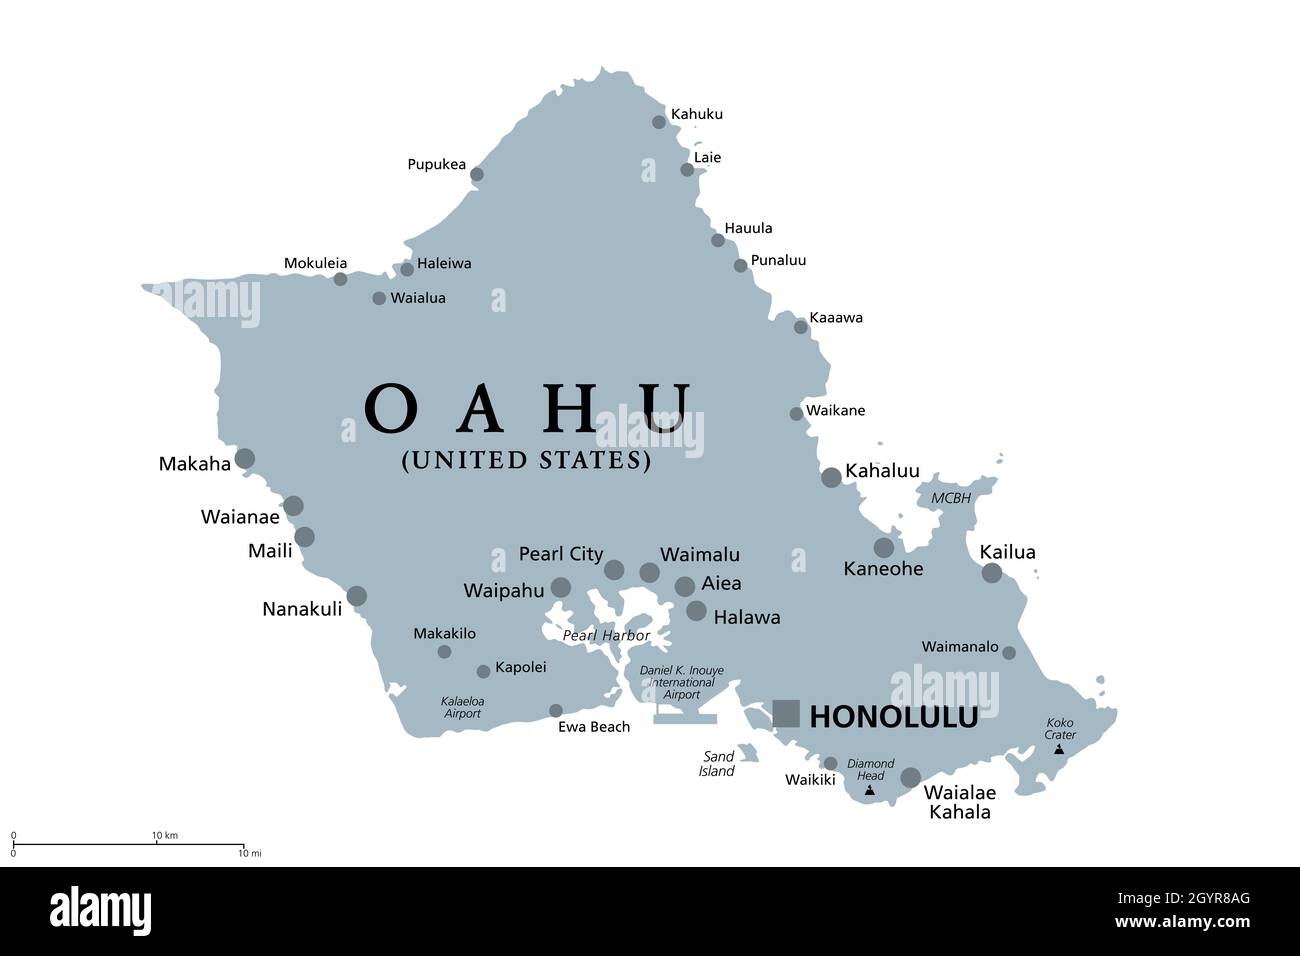 Oahu, Hawaii, gray political map with capital Honolulu. Part of Hawaiian Islands and Hawaii, a state of the United States in the Pacific Ocean. Stock Photo